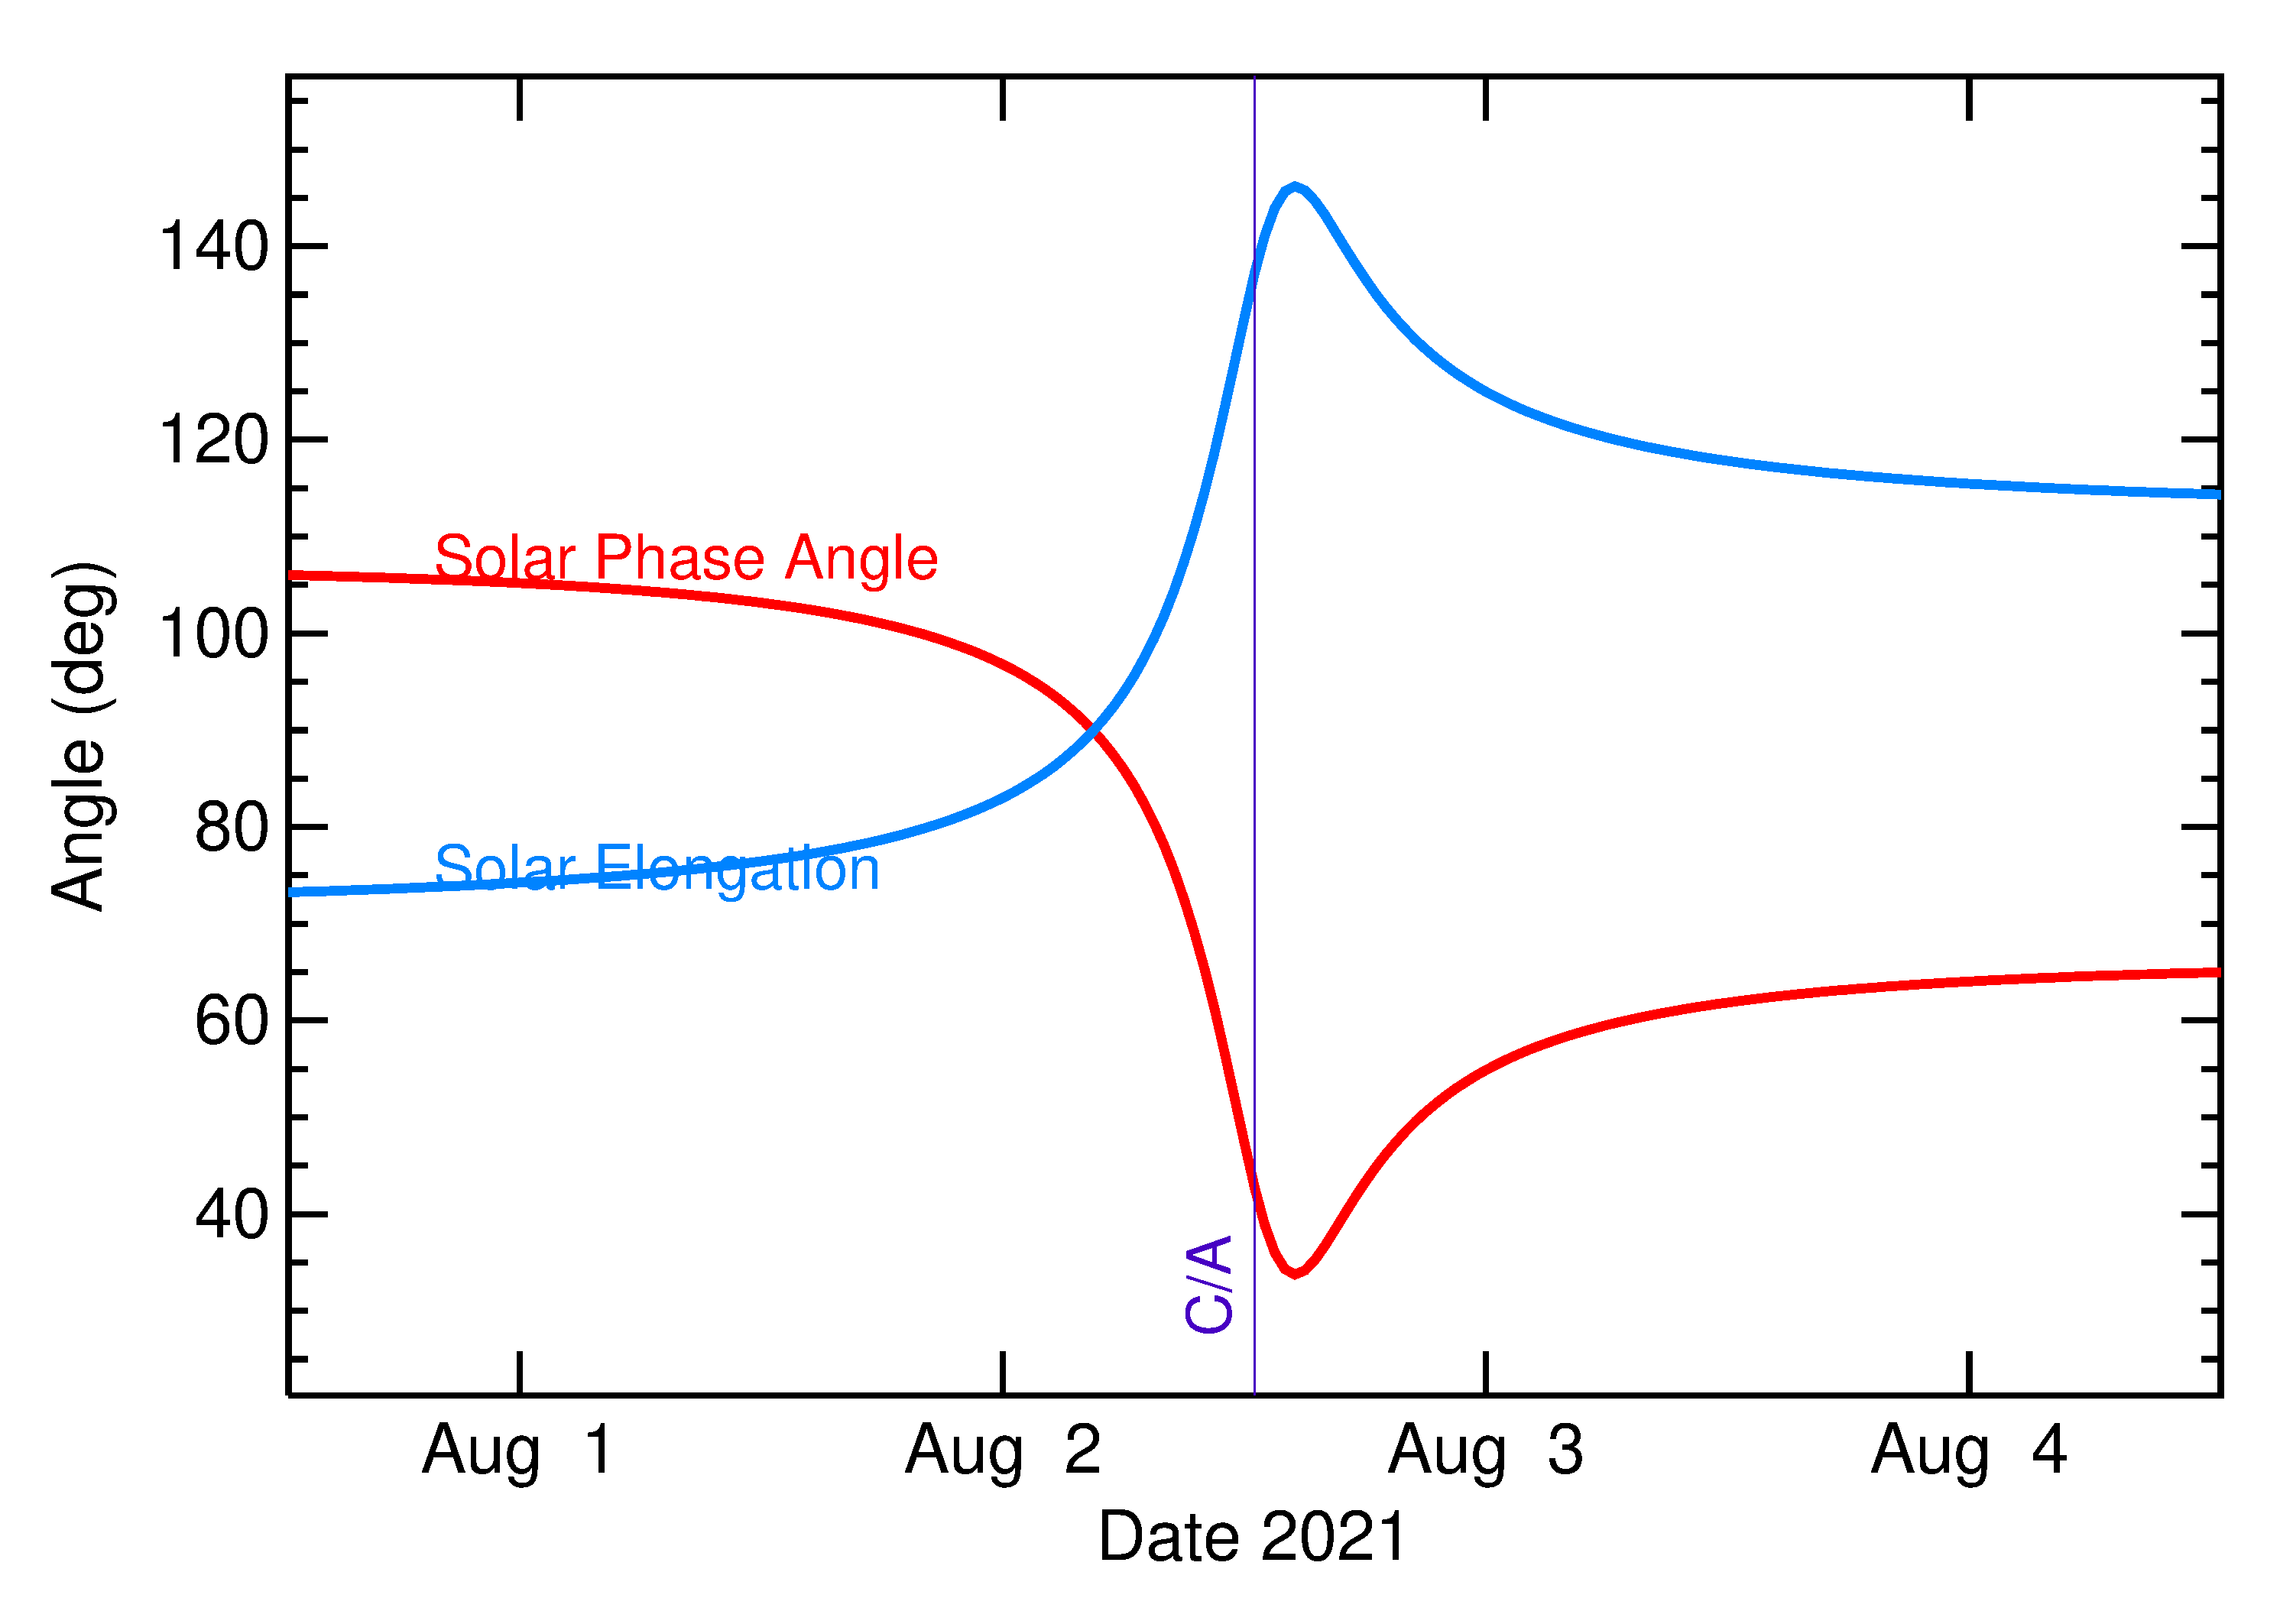 Solar Elongation and Solar Phase Angle of 2021 PC in the days around closest approach